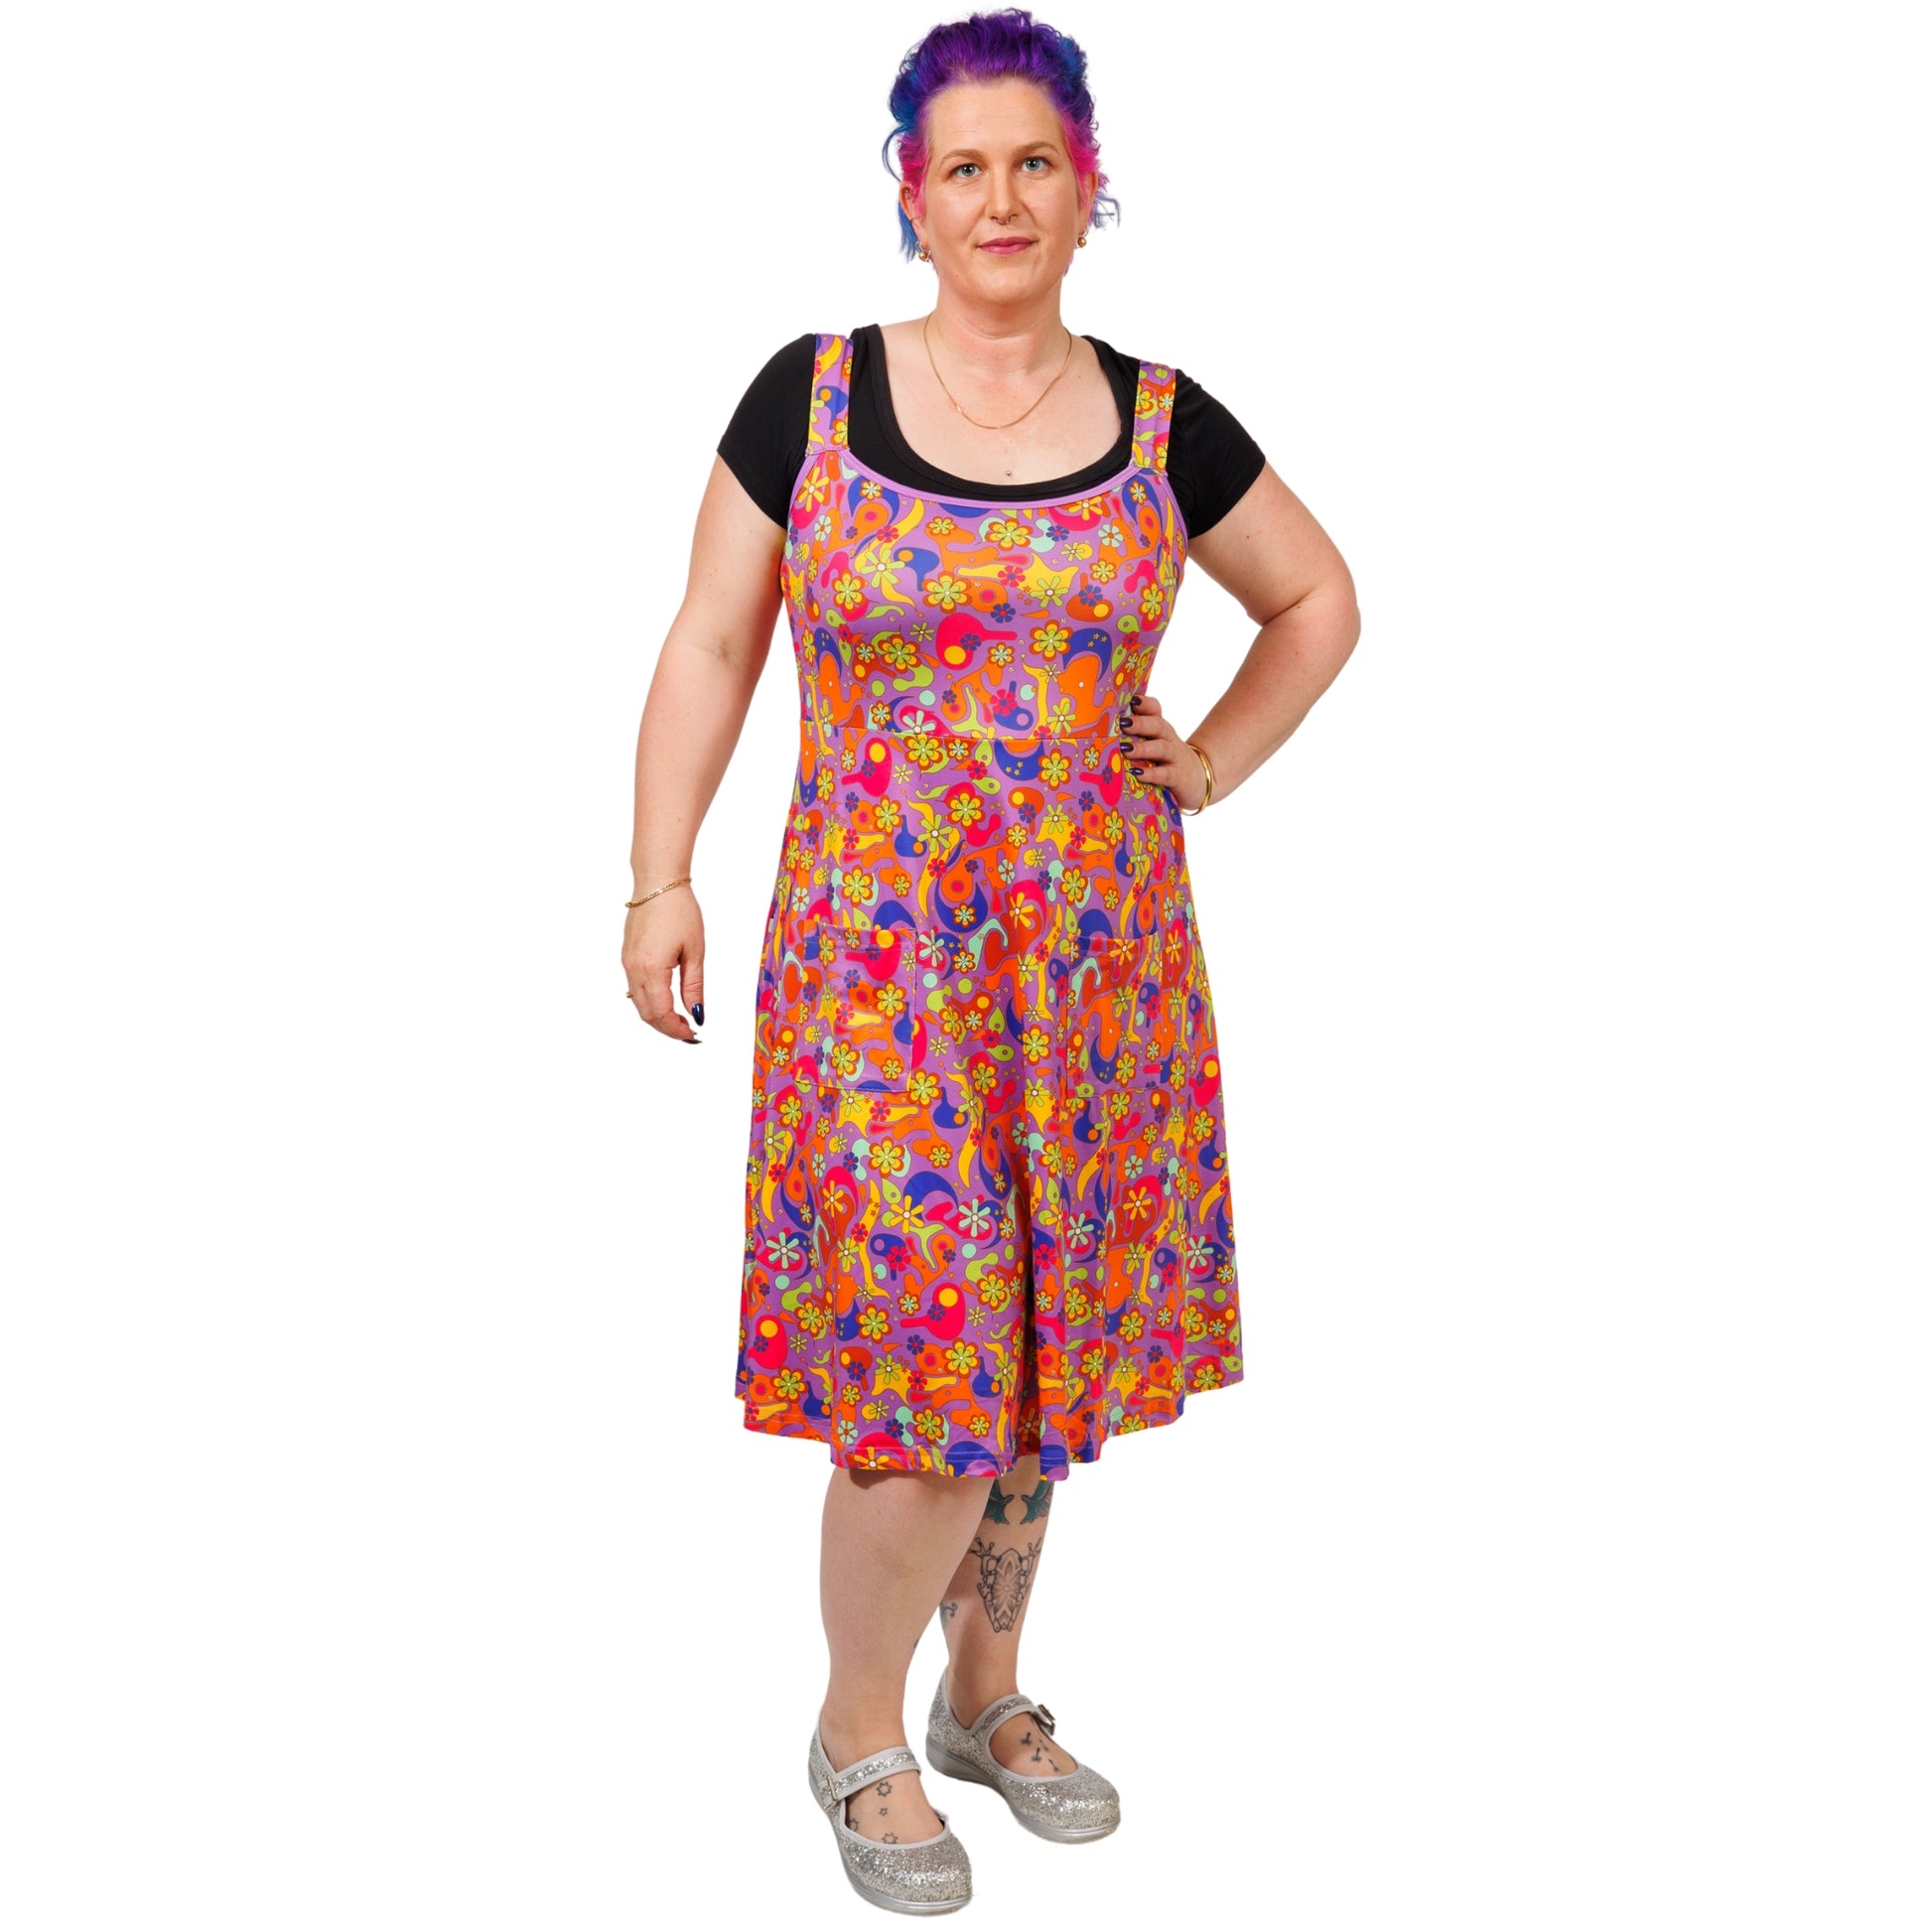 Flower Power Pinafore by RainbowsAndFairies.com.au (Psychedelic - Woodstock - Dress With Pockets - Vintage Inspired - Kitsch) - SKU: CL_PFORE_FLOPO_ORG - Pic-04